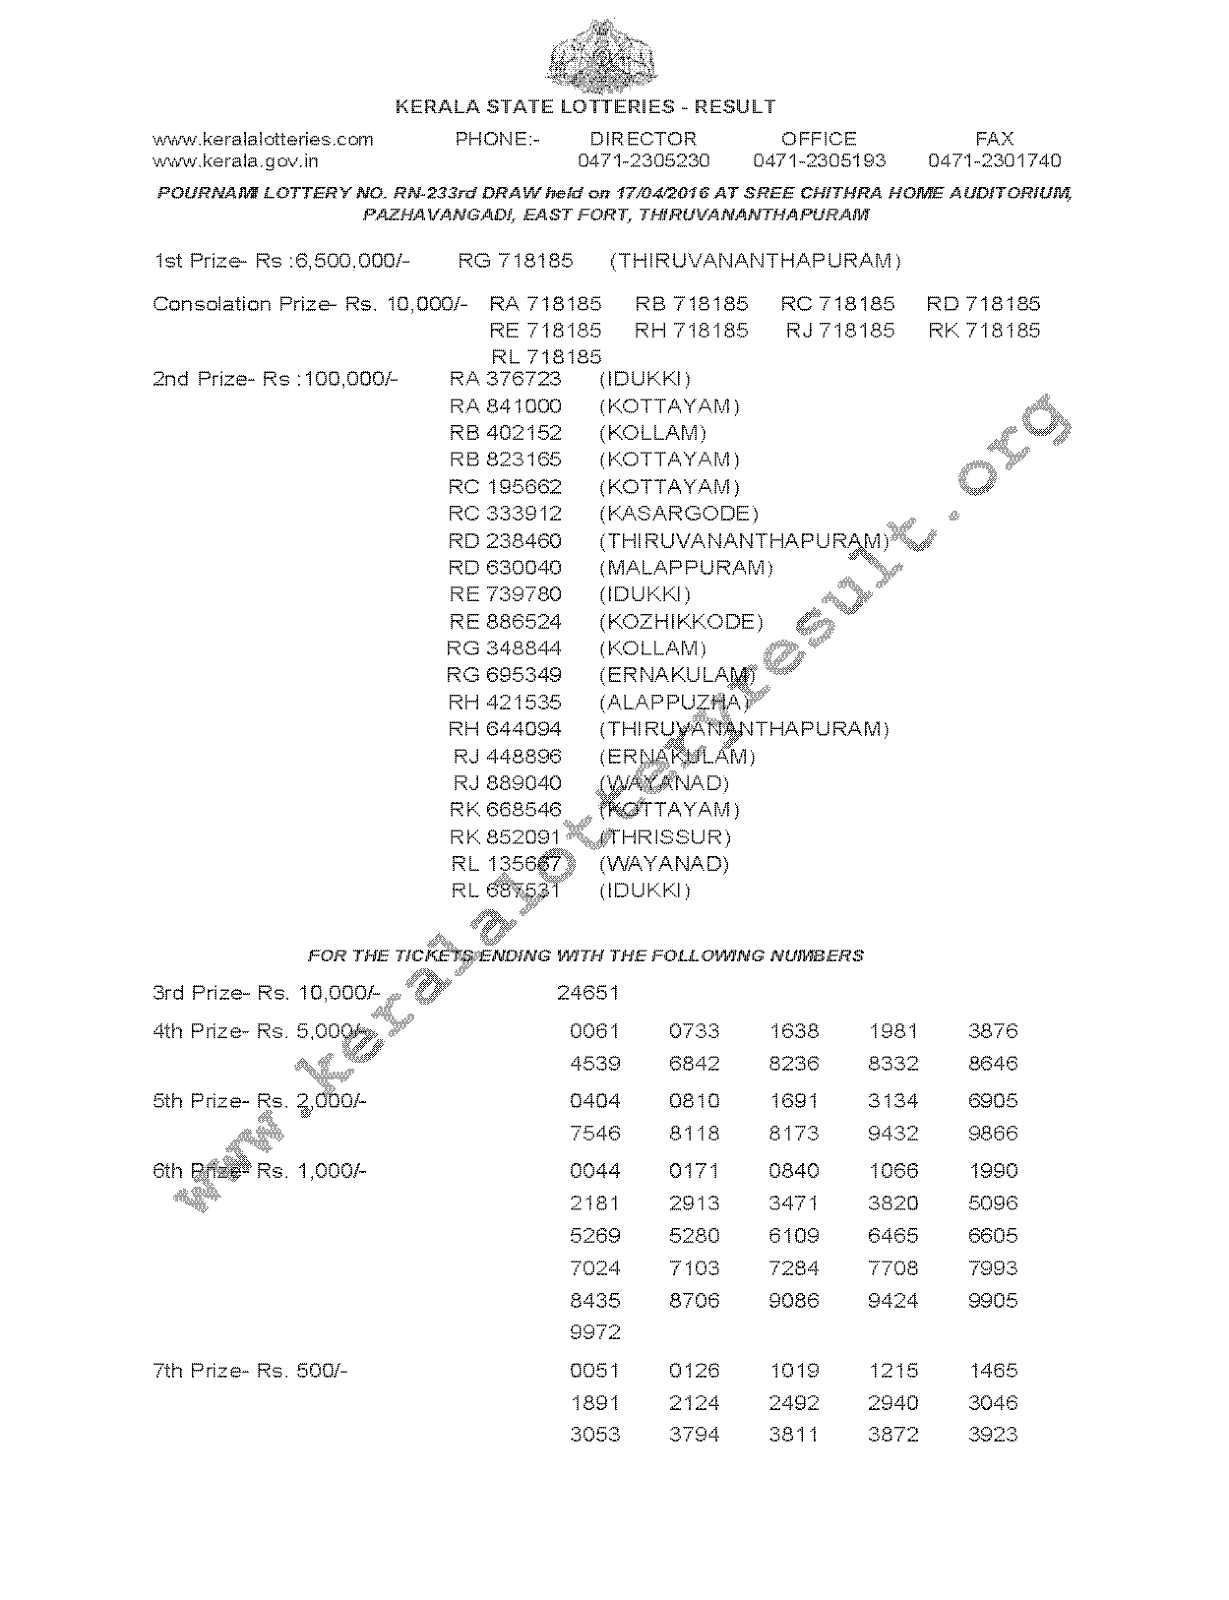 POURNAMI Lottery RN 233 Result 17-4-2016